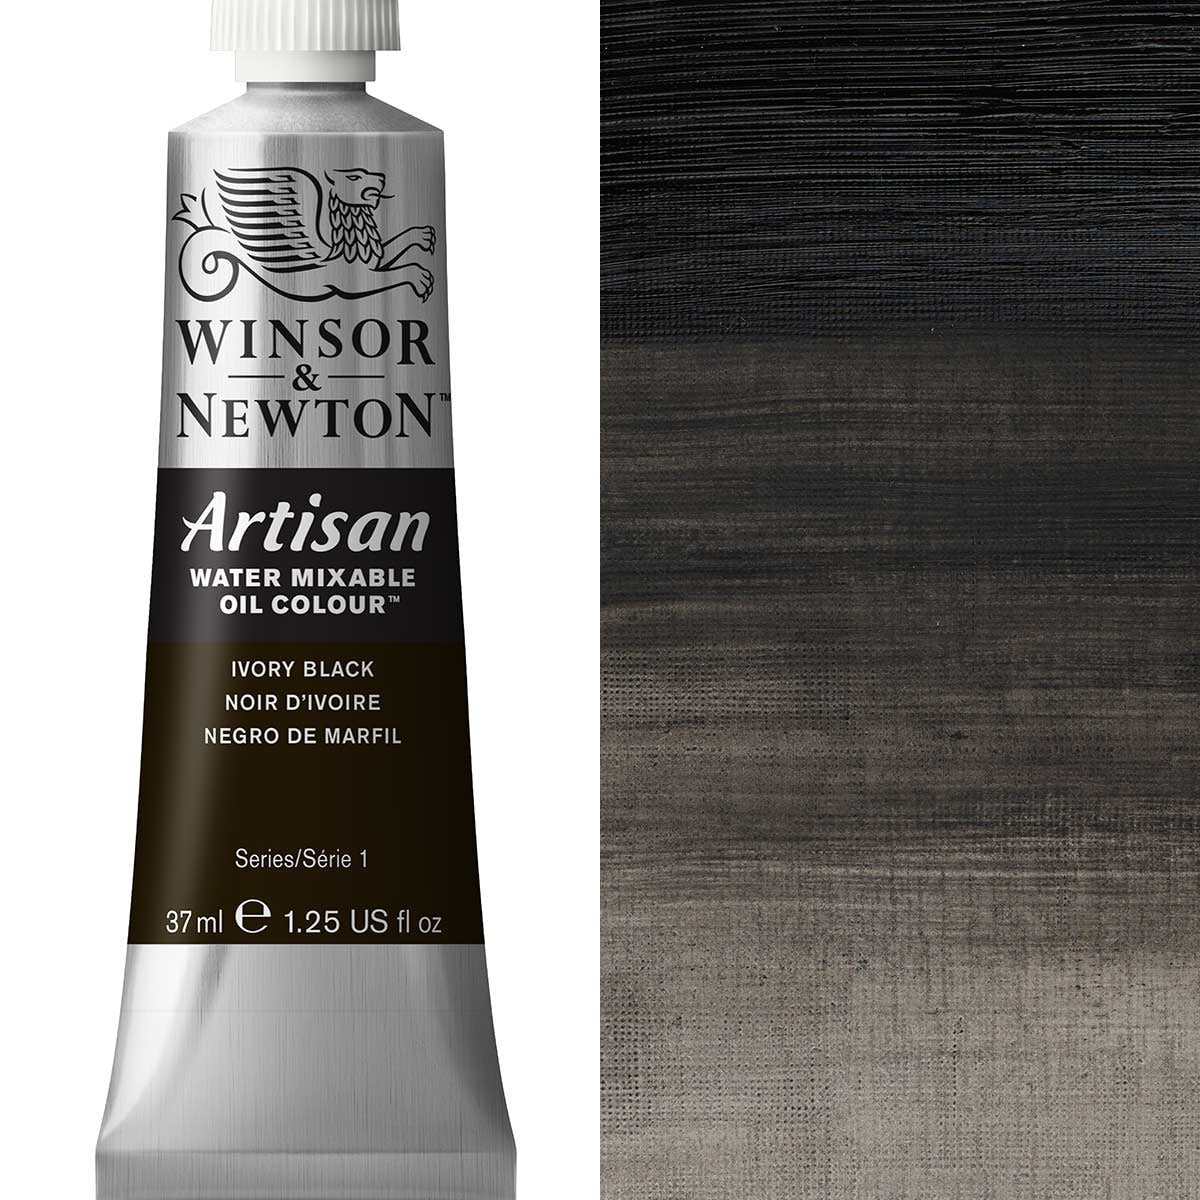 Winsor and Newton - Artisan Oil Colour Watermixable - 37ml - Ivory Black